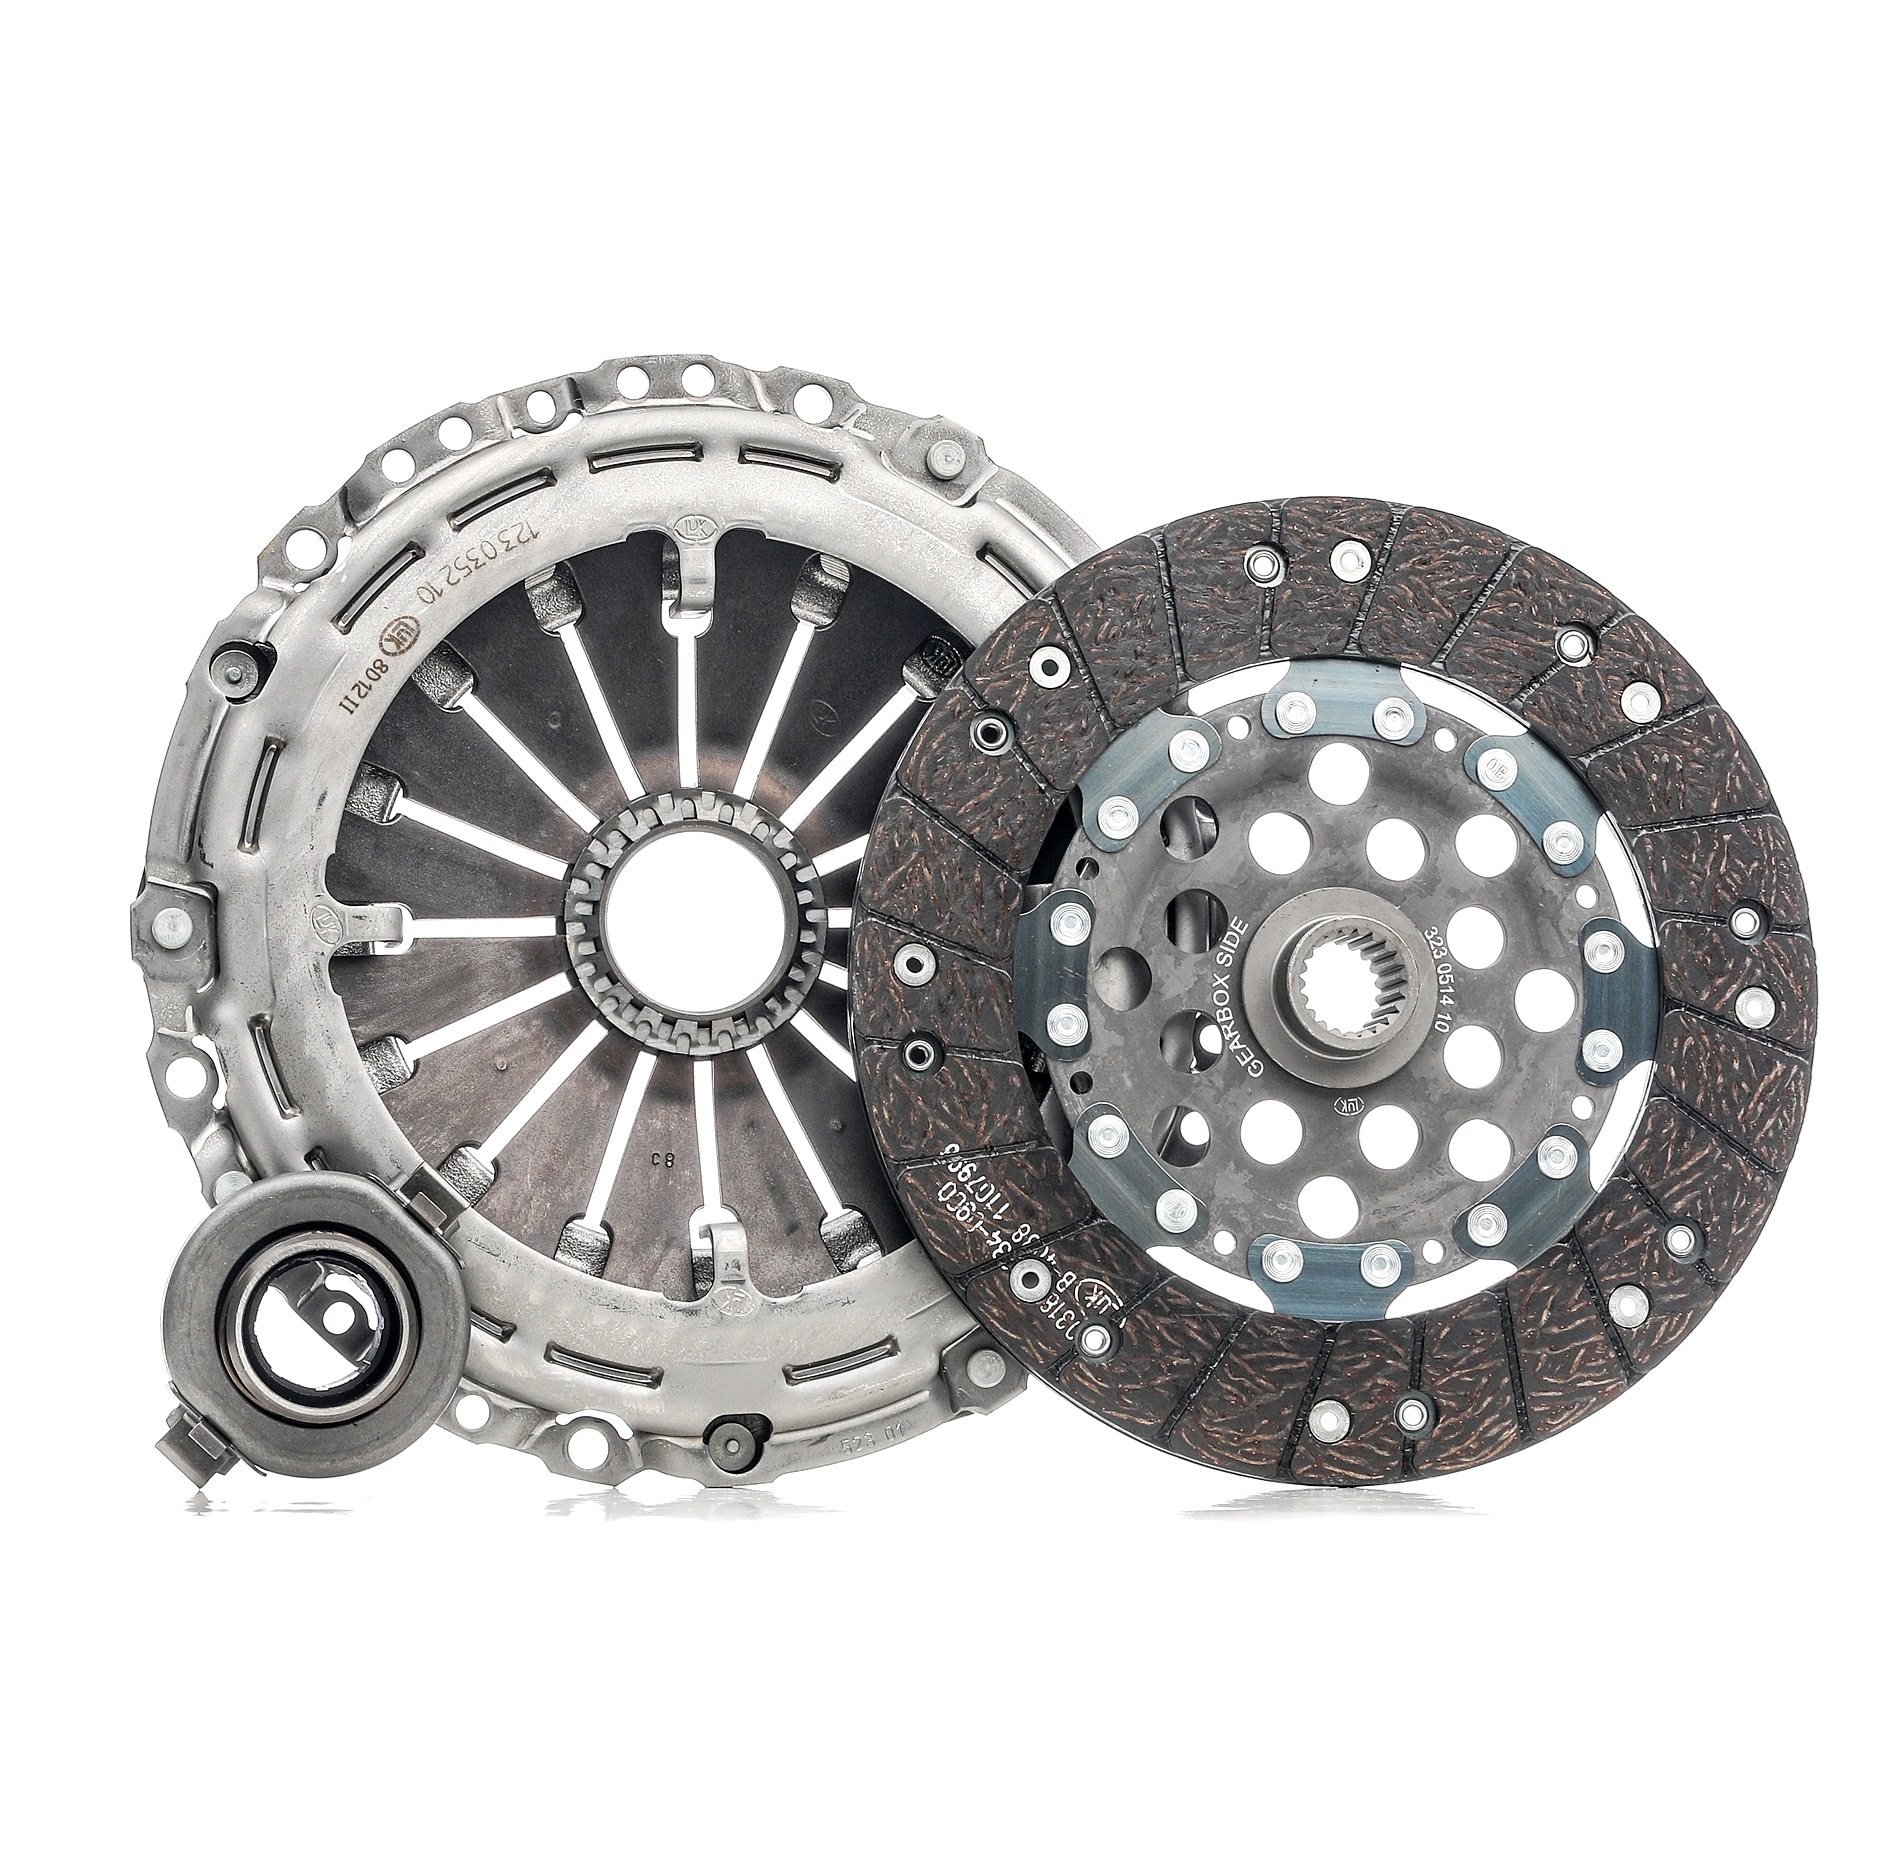 LuK BR 0222 623 3041 00 Clutch kit for engines with dual-mass flywheel, with clutch release bearing, with clutch disc, Check and replace dual-mass flywheel if necessary., 230mm